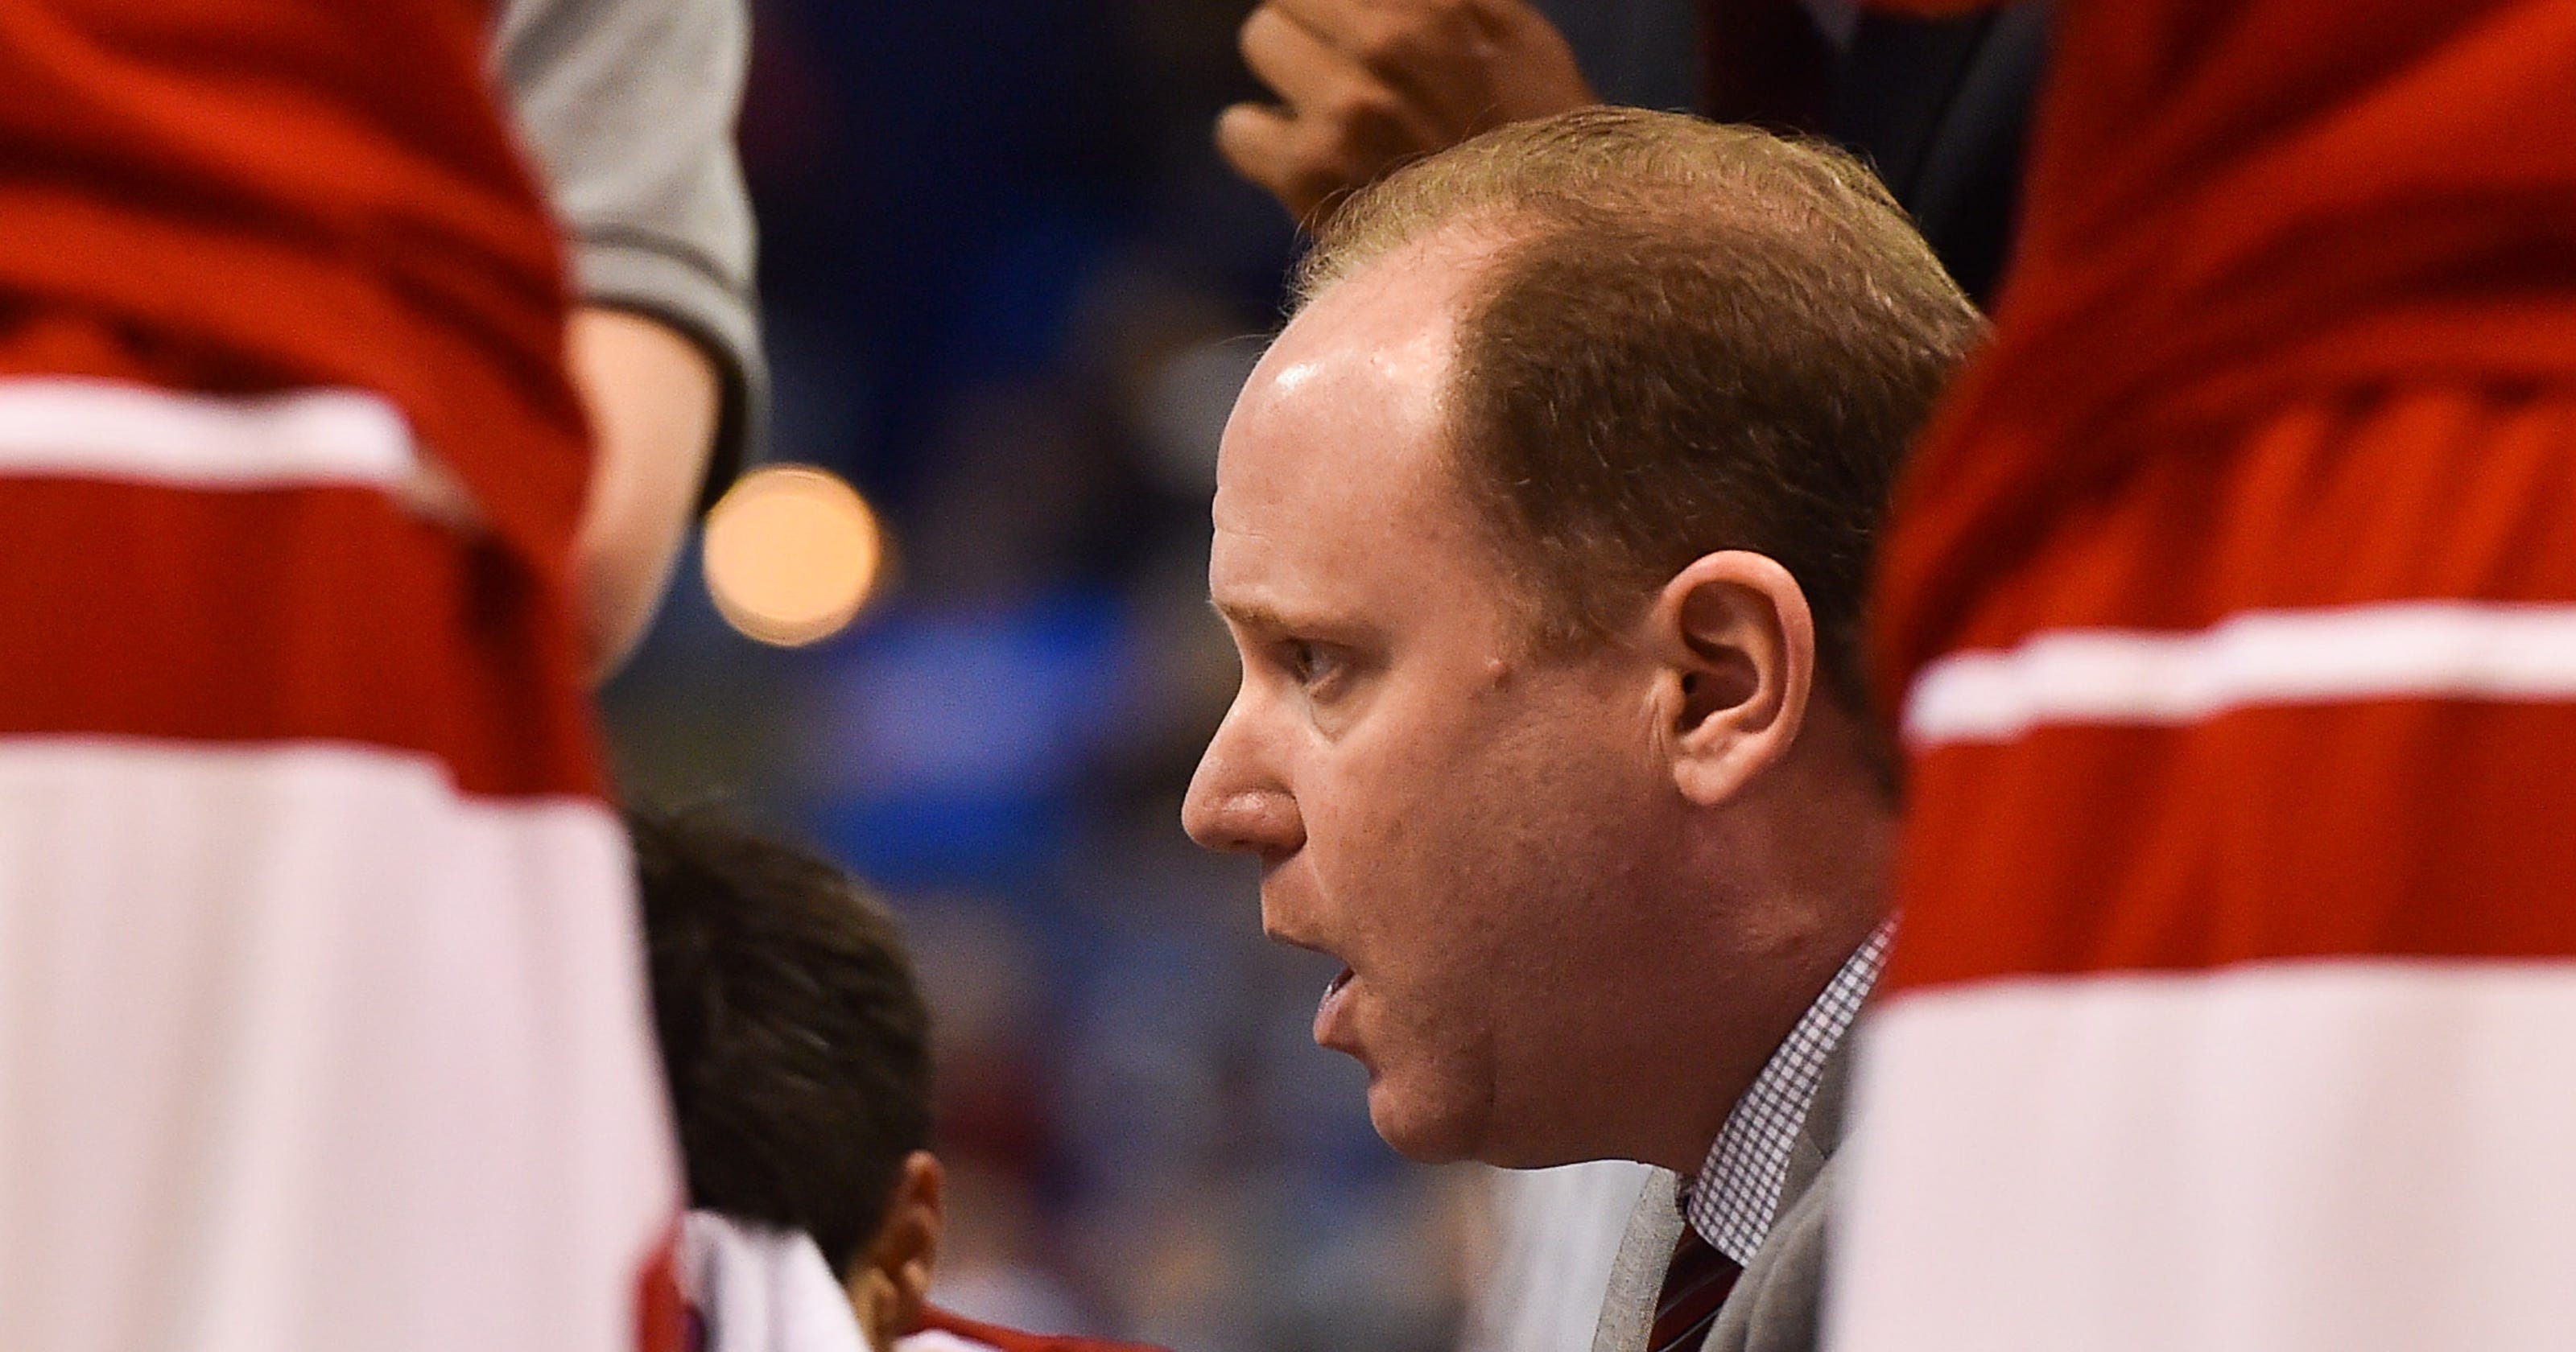 Tough Times Personal Losses Unite Greg Gard With Wisconsin Coaches